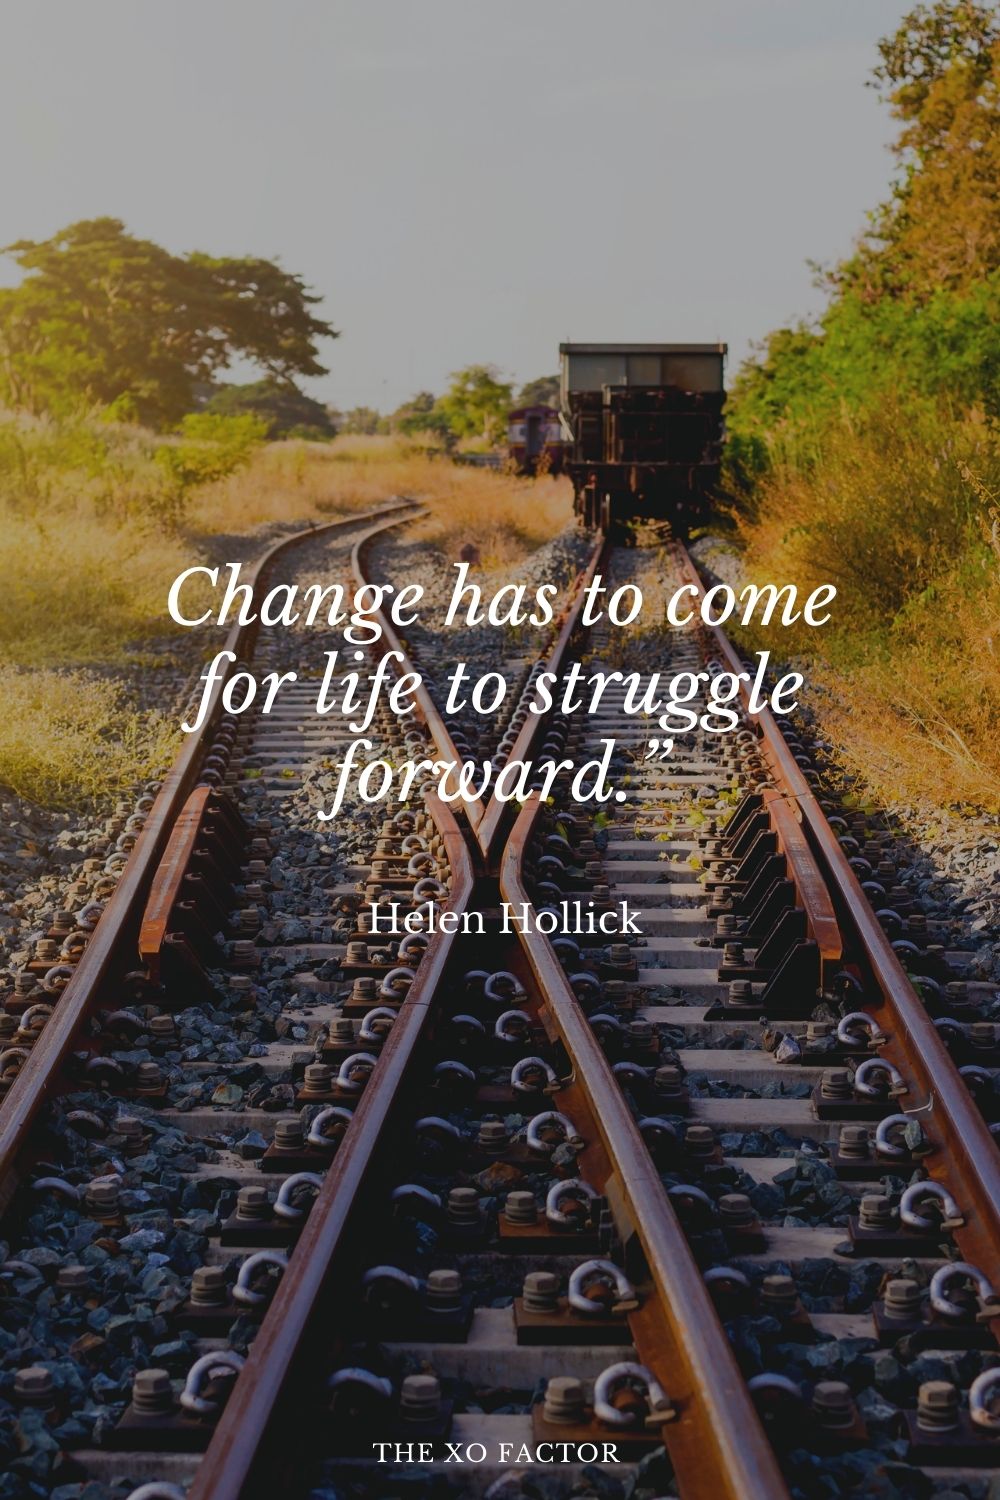 Change has to come for life to struggle forward.” Helen Hollick